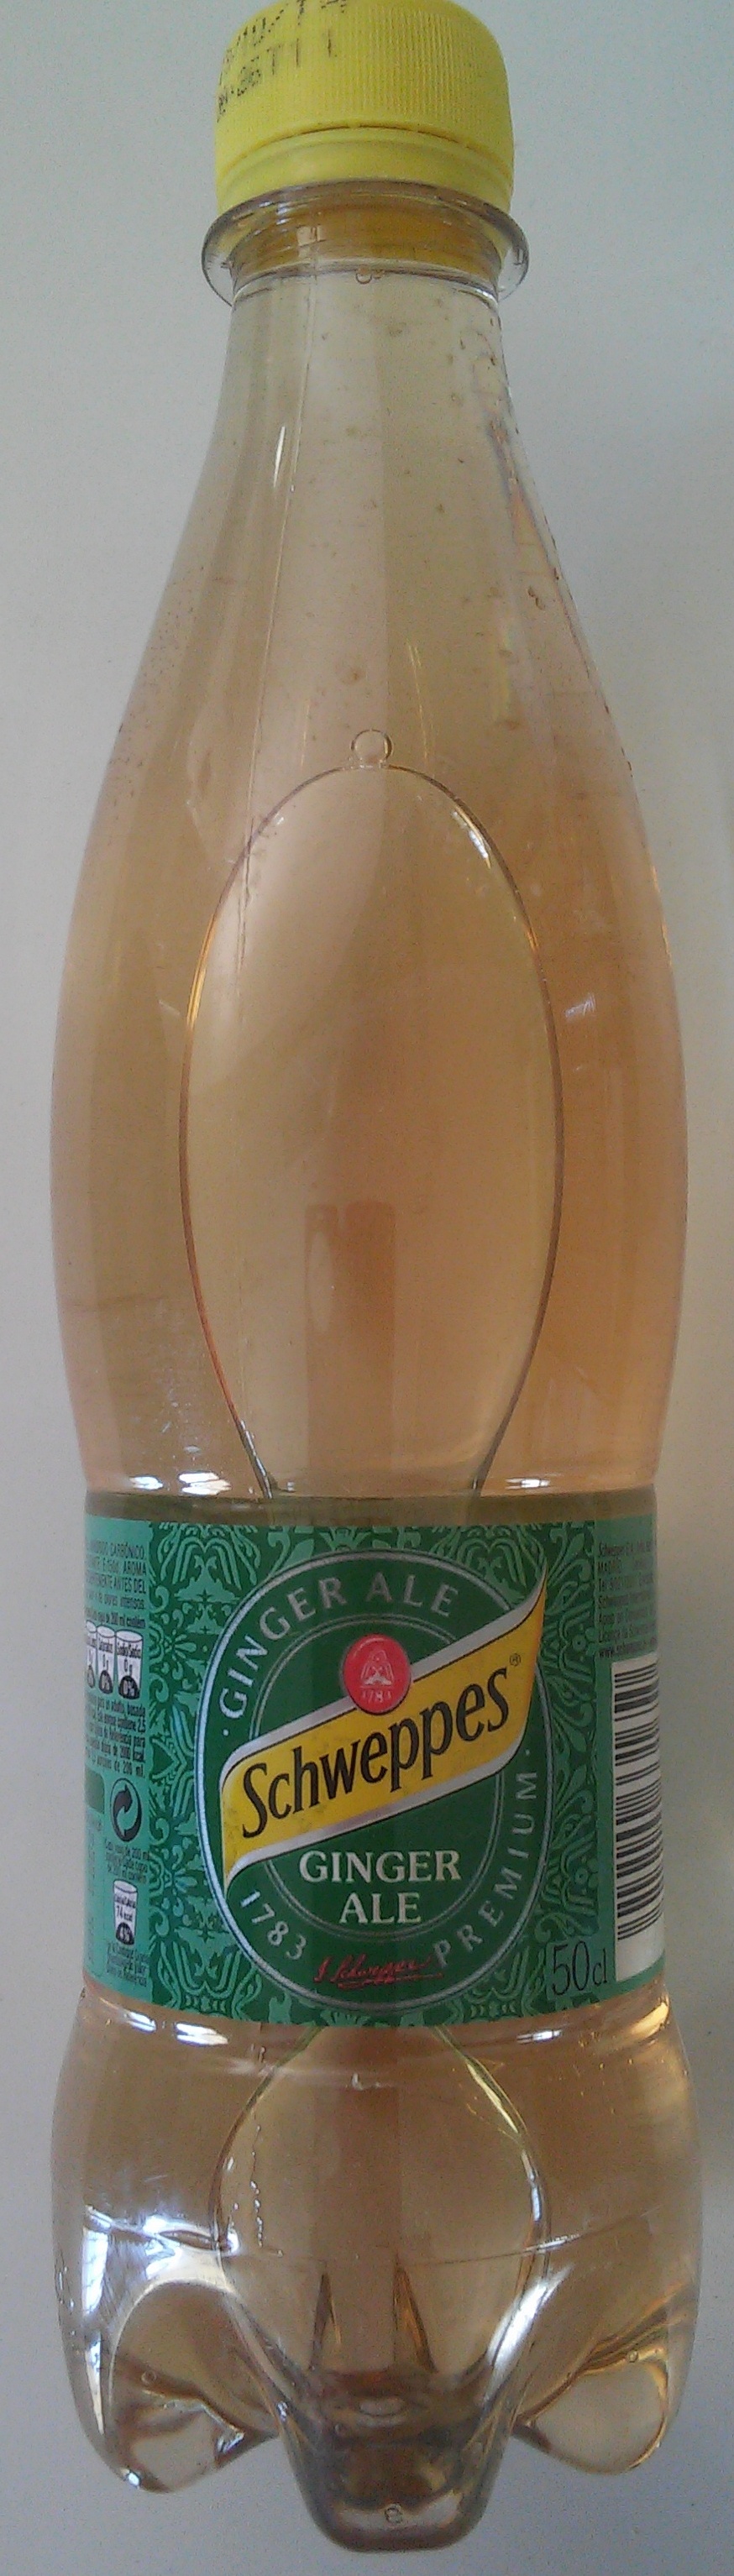 Ginger ale - Producto